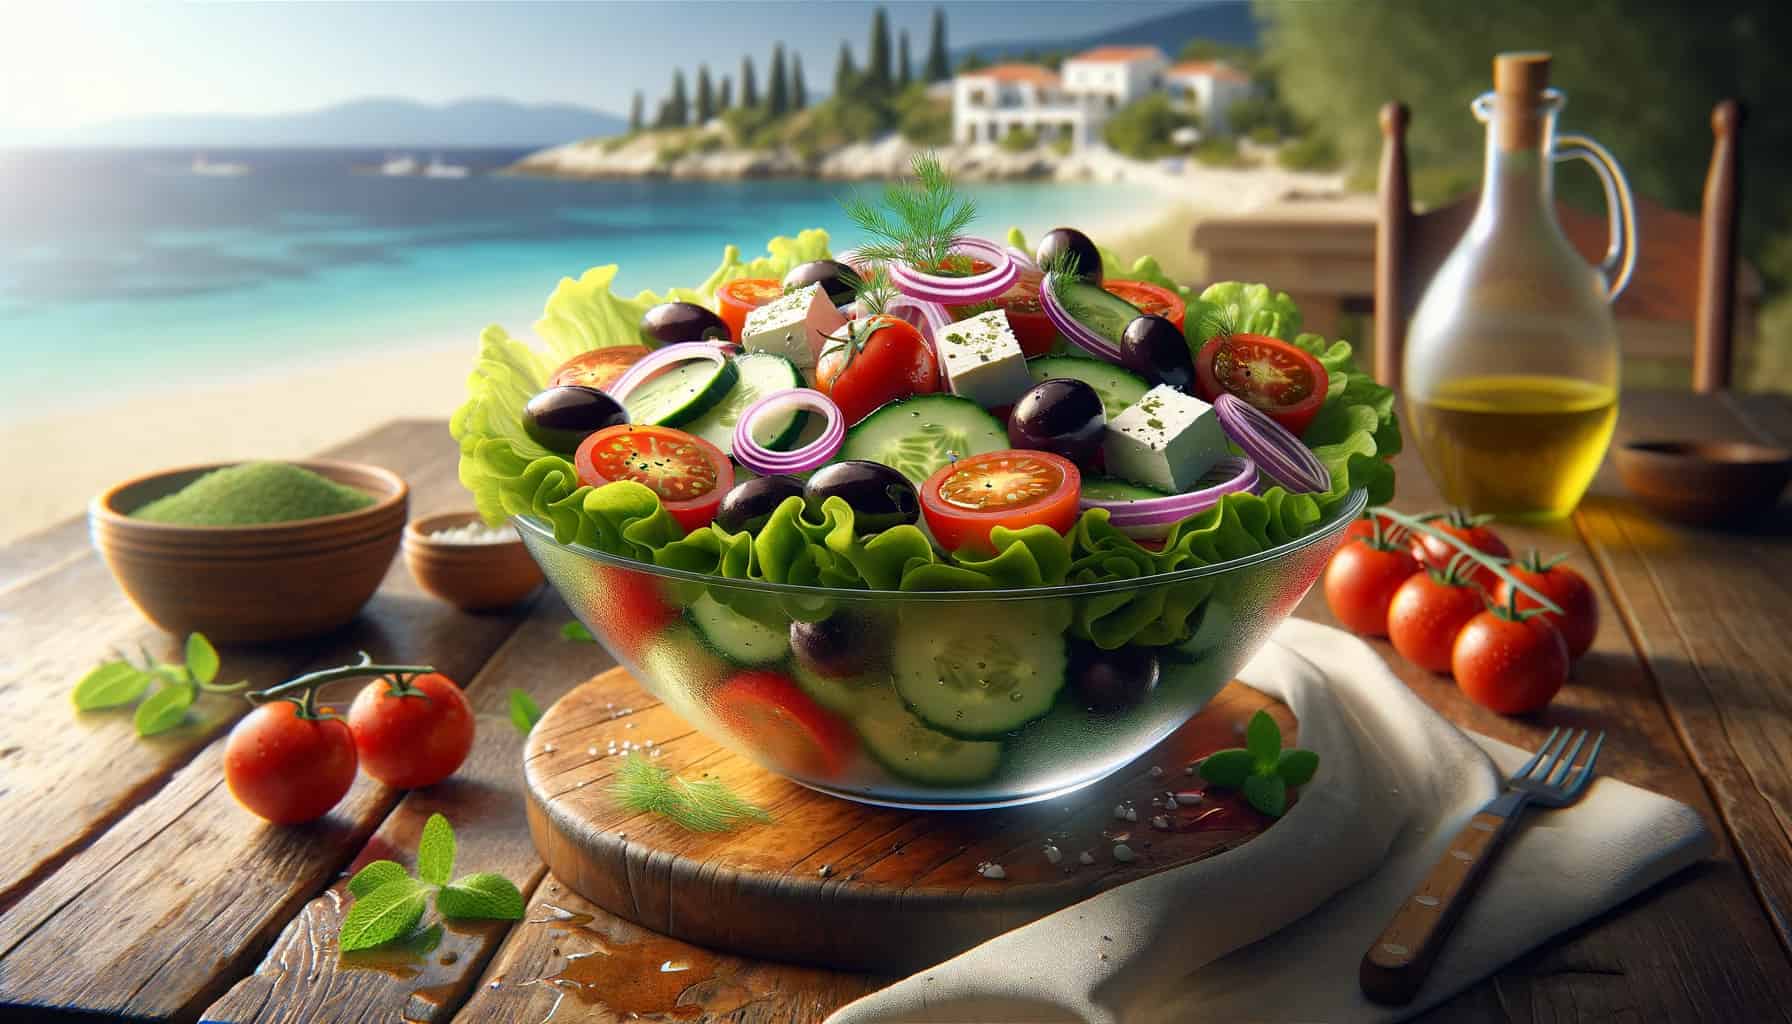 Mediterranean salad. A large glass bowl showcases a vibrant mixture of fresh ingredients. Crisp romaine lettuce forms the base, topped with cherry tomatoes, cucumber slices, red onion rings, and kalamata olives. Generous chunks of feta cheese are scattered throughout, and the salad is garnished with fresh dill and mint leaves.